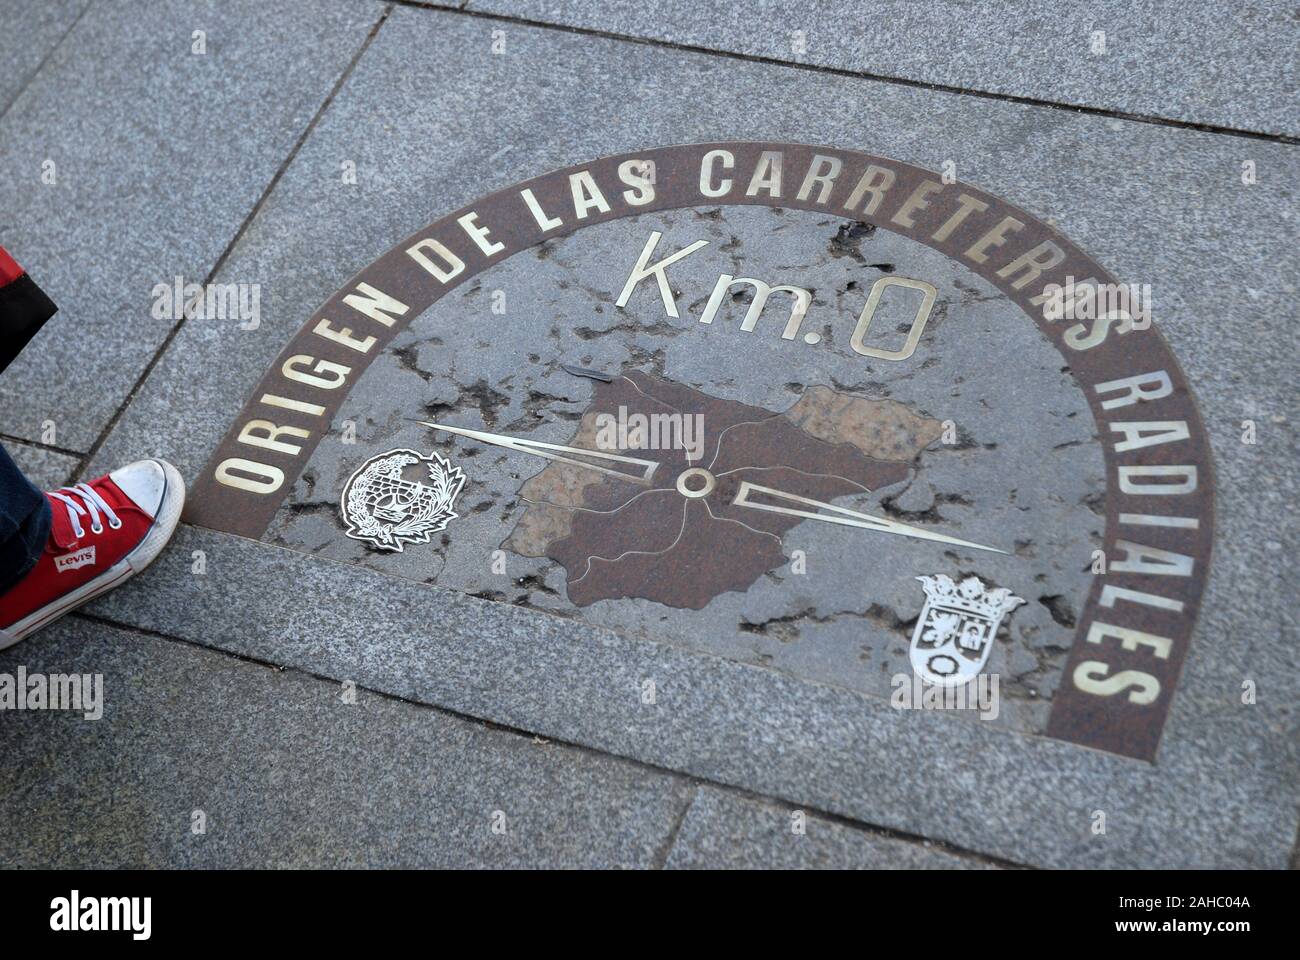 Zero Km stone indicating the geographical centre of Spain Madrid, Spain. Stock Photo